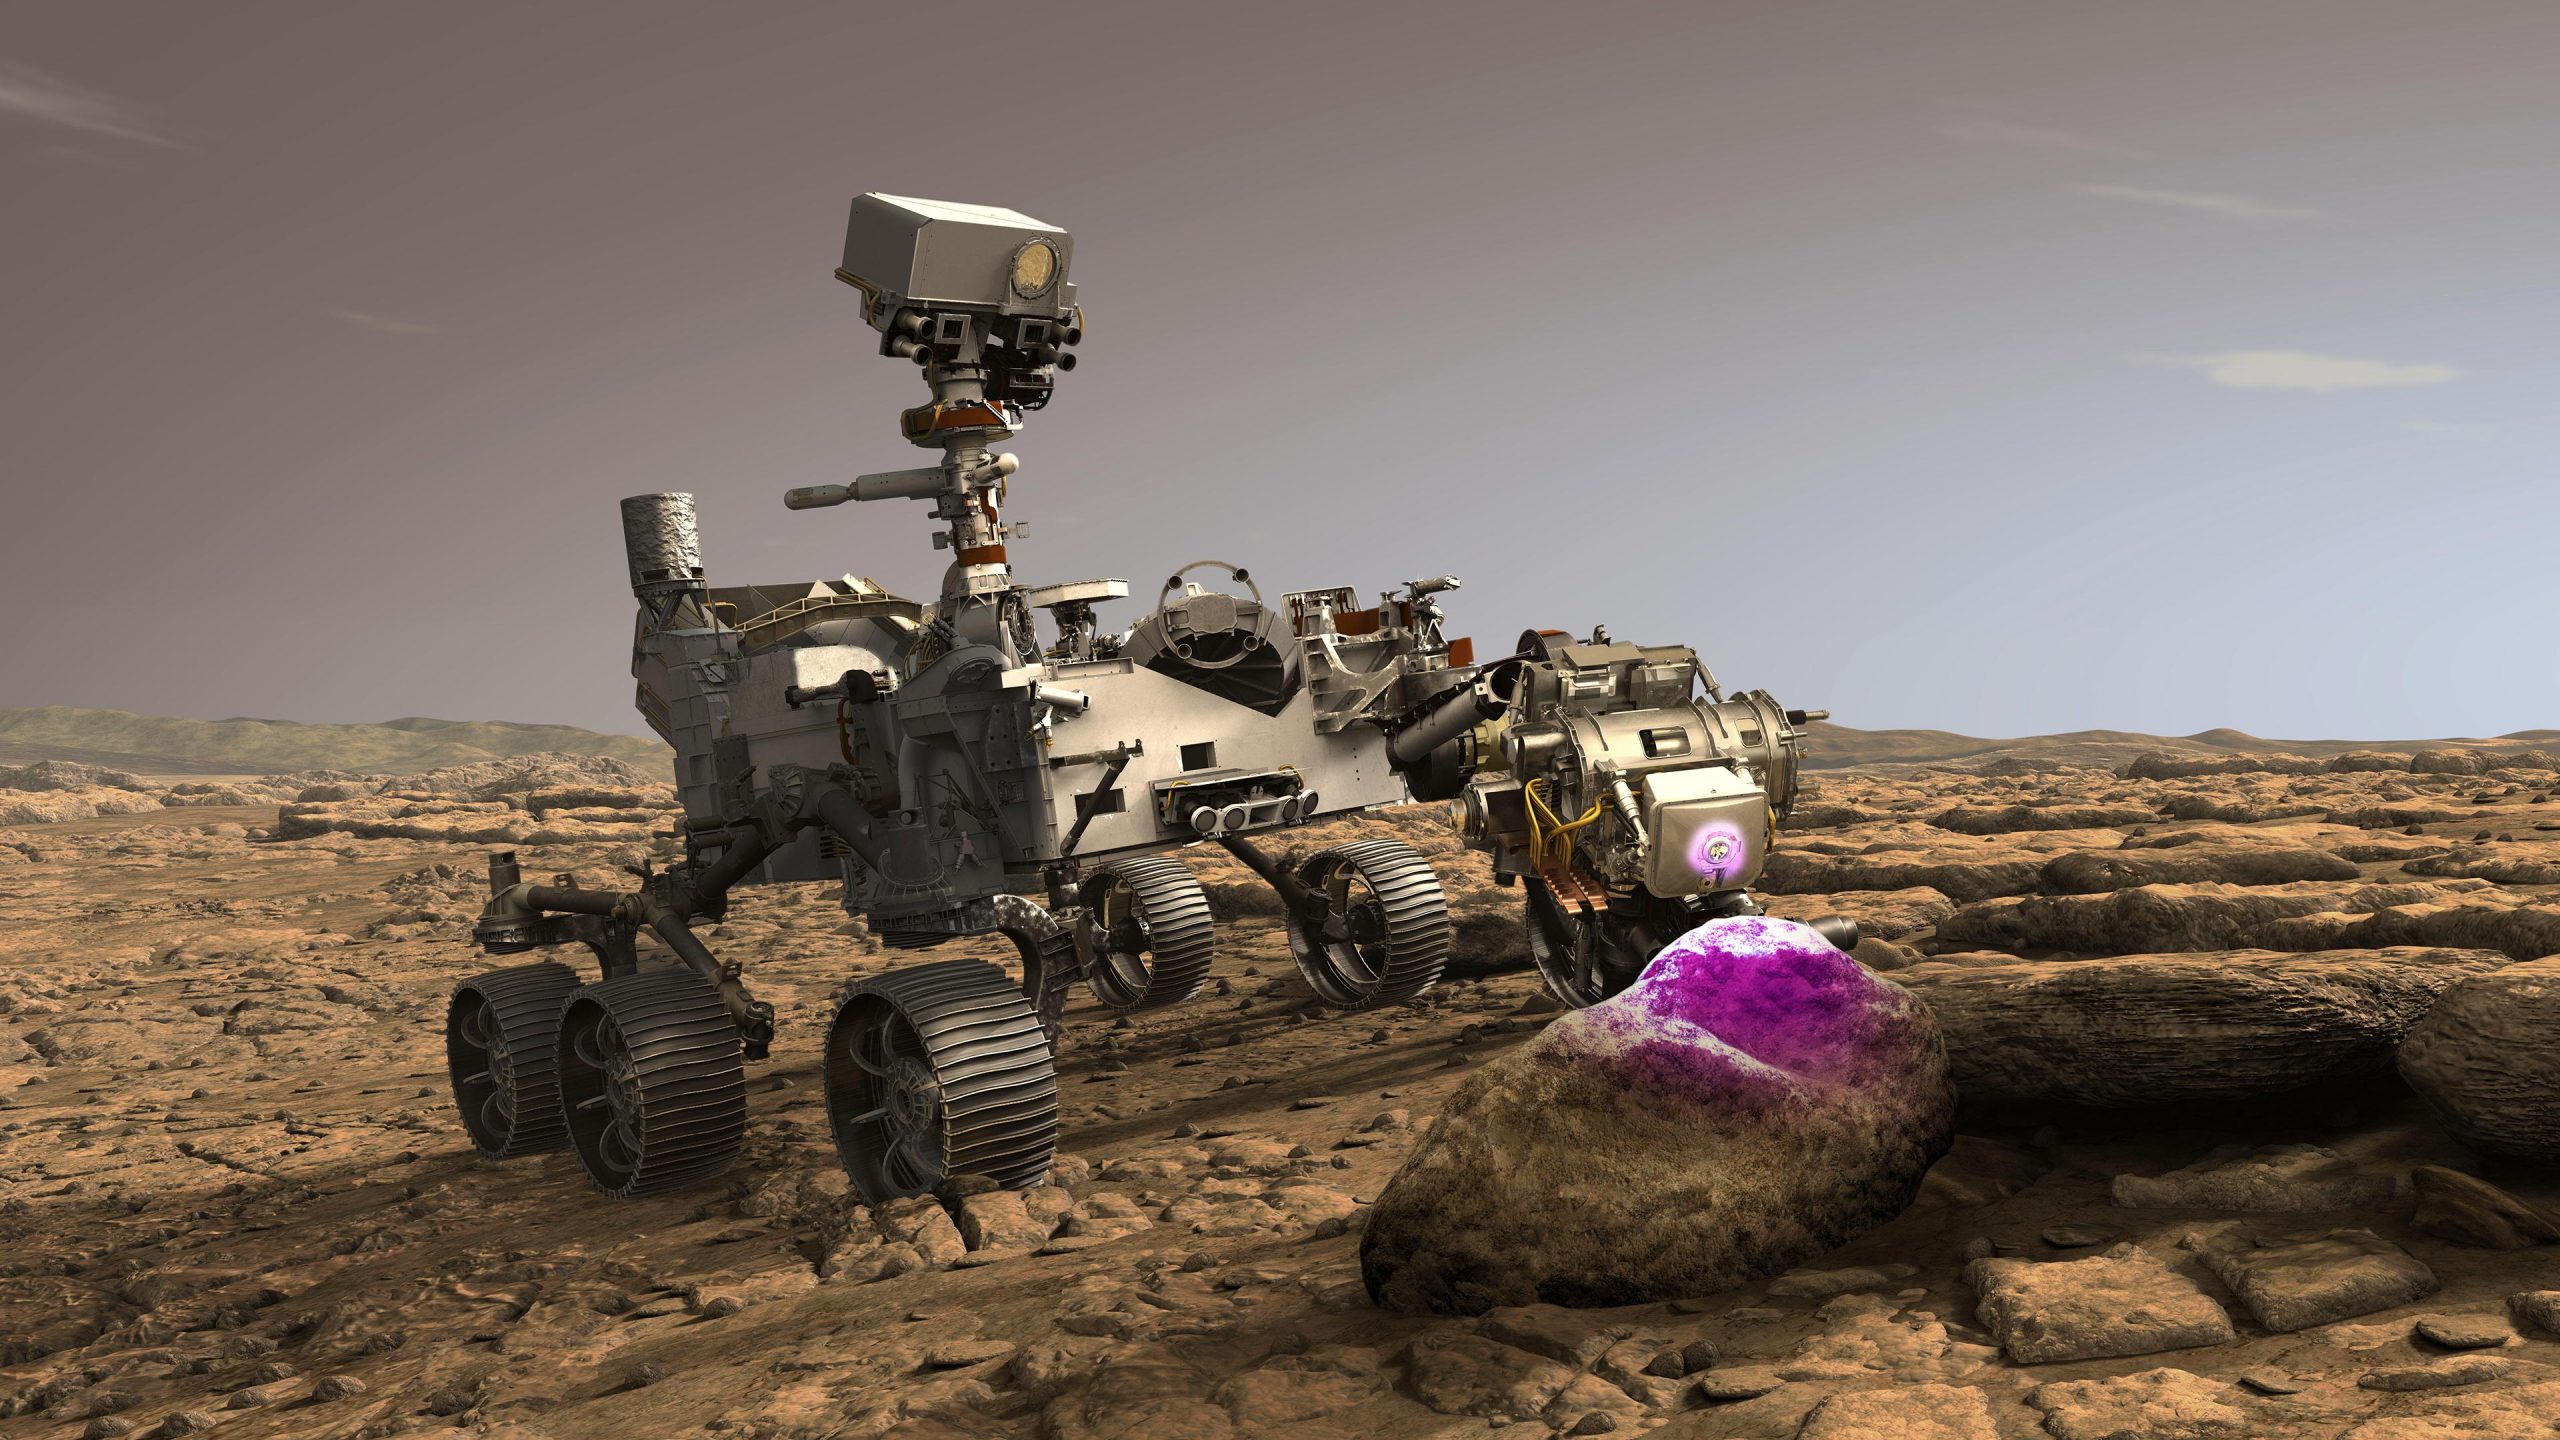 Searching for Signs of Life on Mars: Perseverance's Robotic Arm Starts Conducting Science